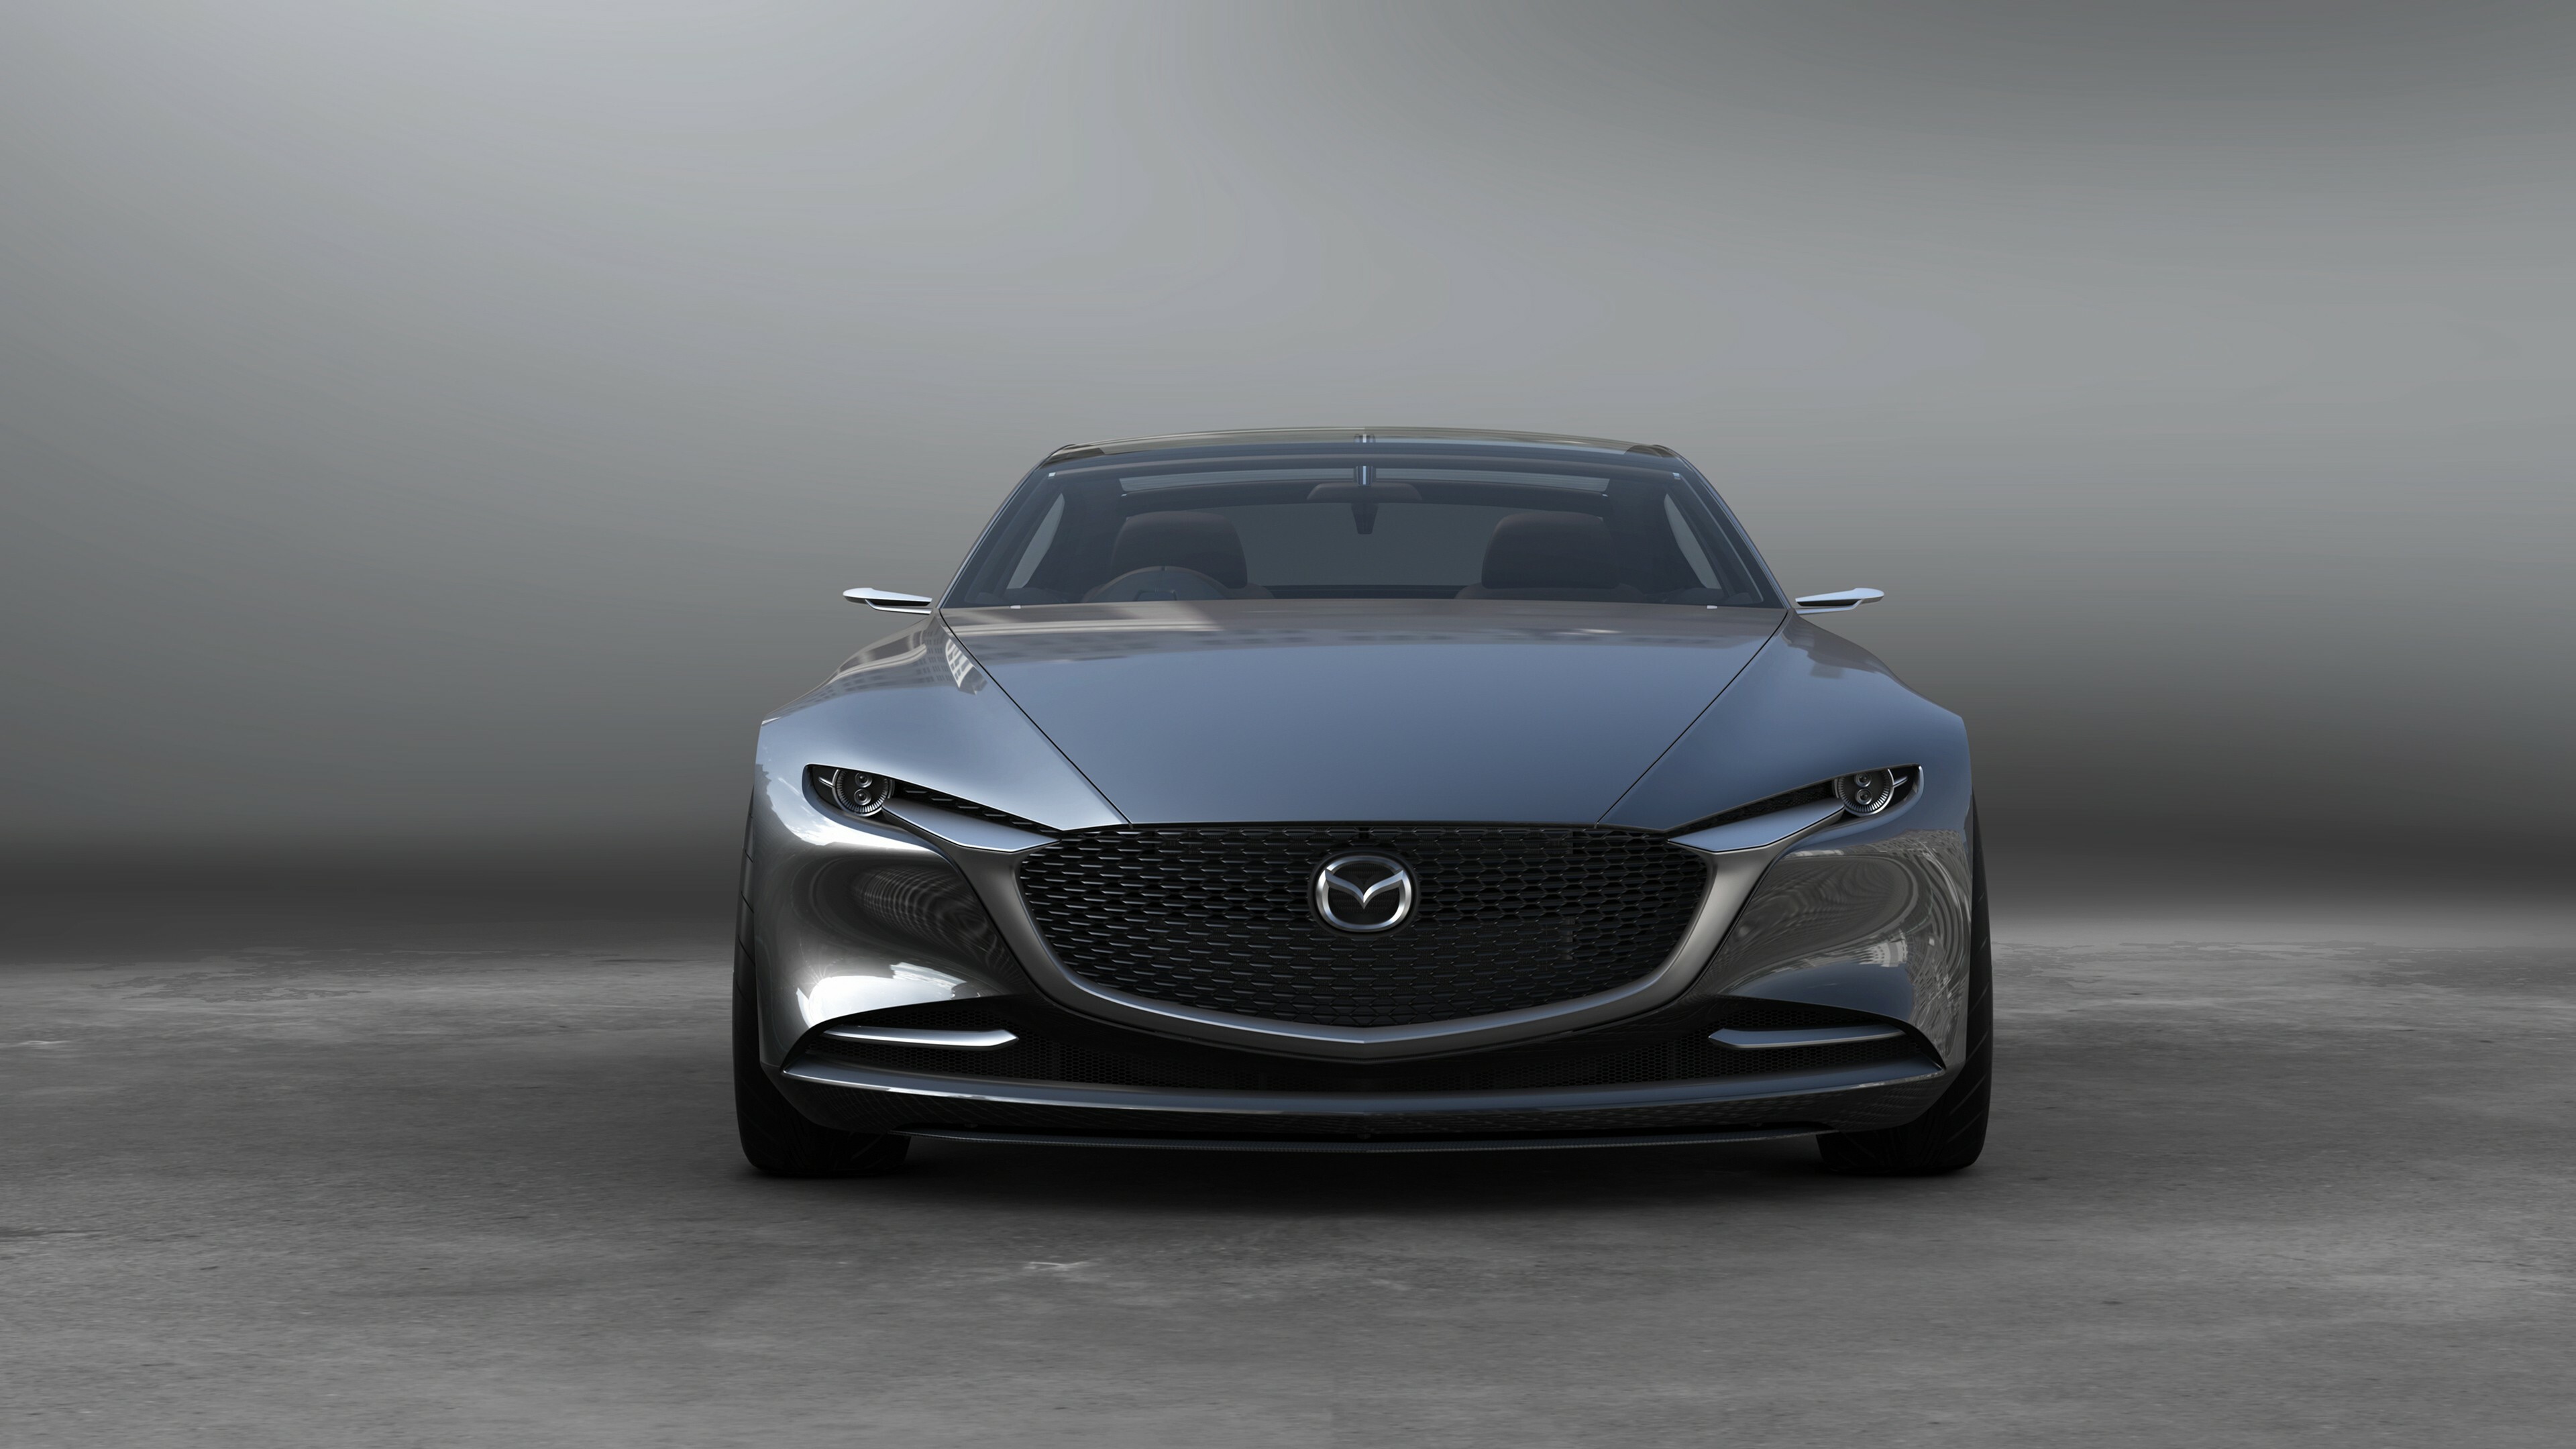 Mazda: Car brand, Known for technology and style, Vision Coupe Concept. 3840x2160 4K Wallpaper.